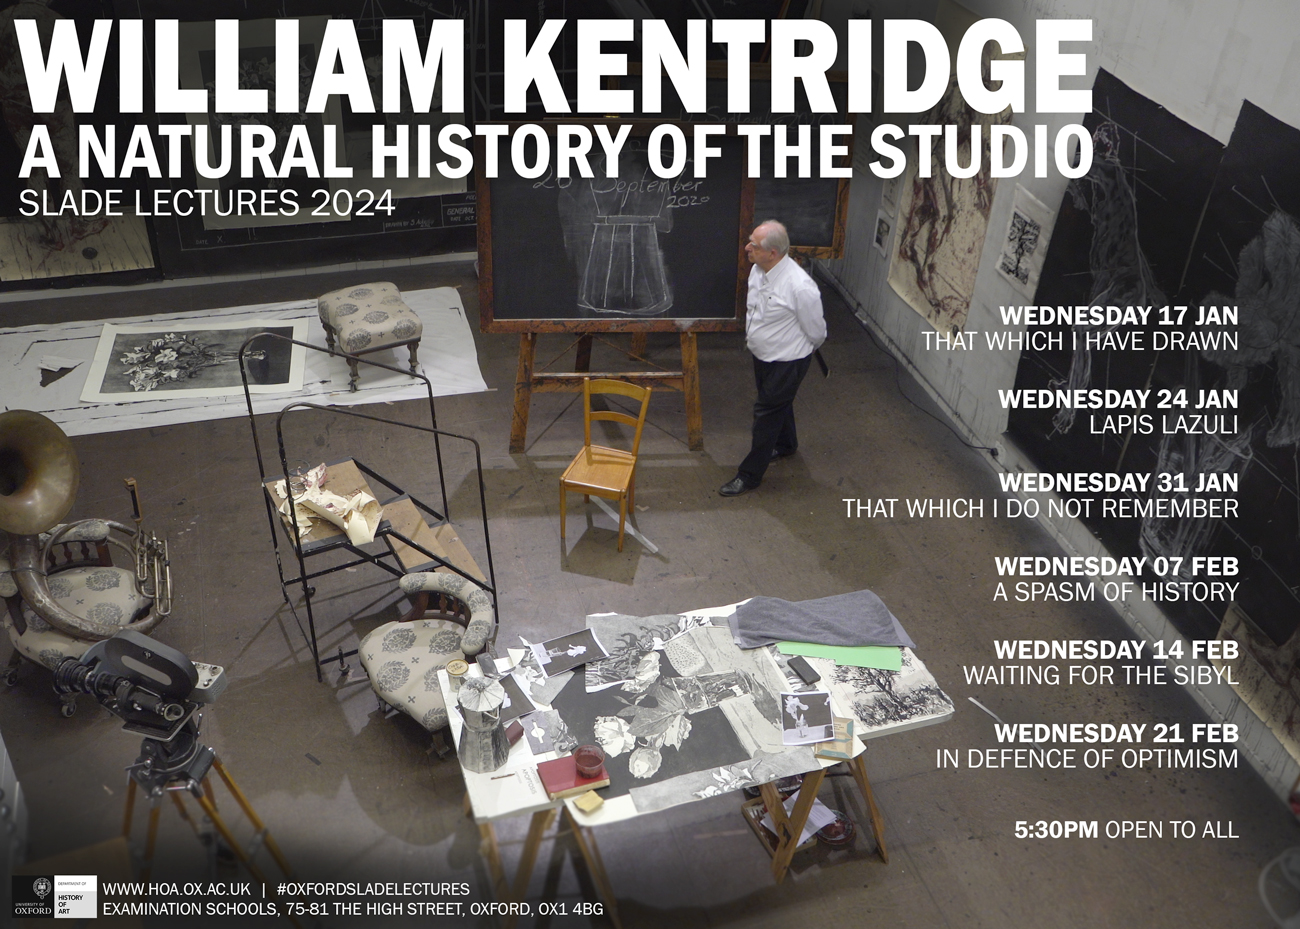 Slade Lectures 2024 - William Kentridge: A Natural History of the Studio